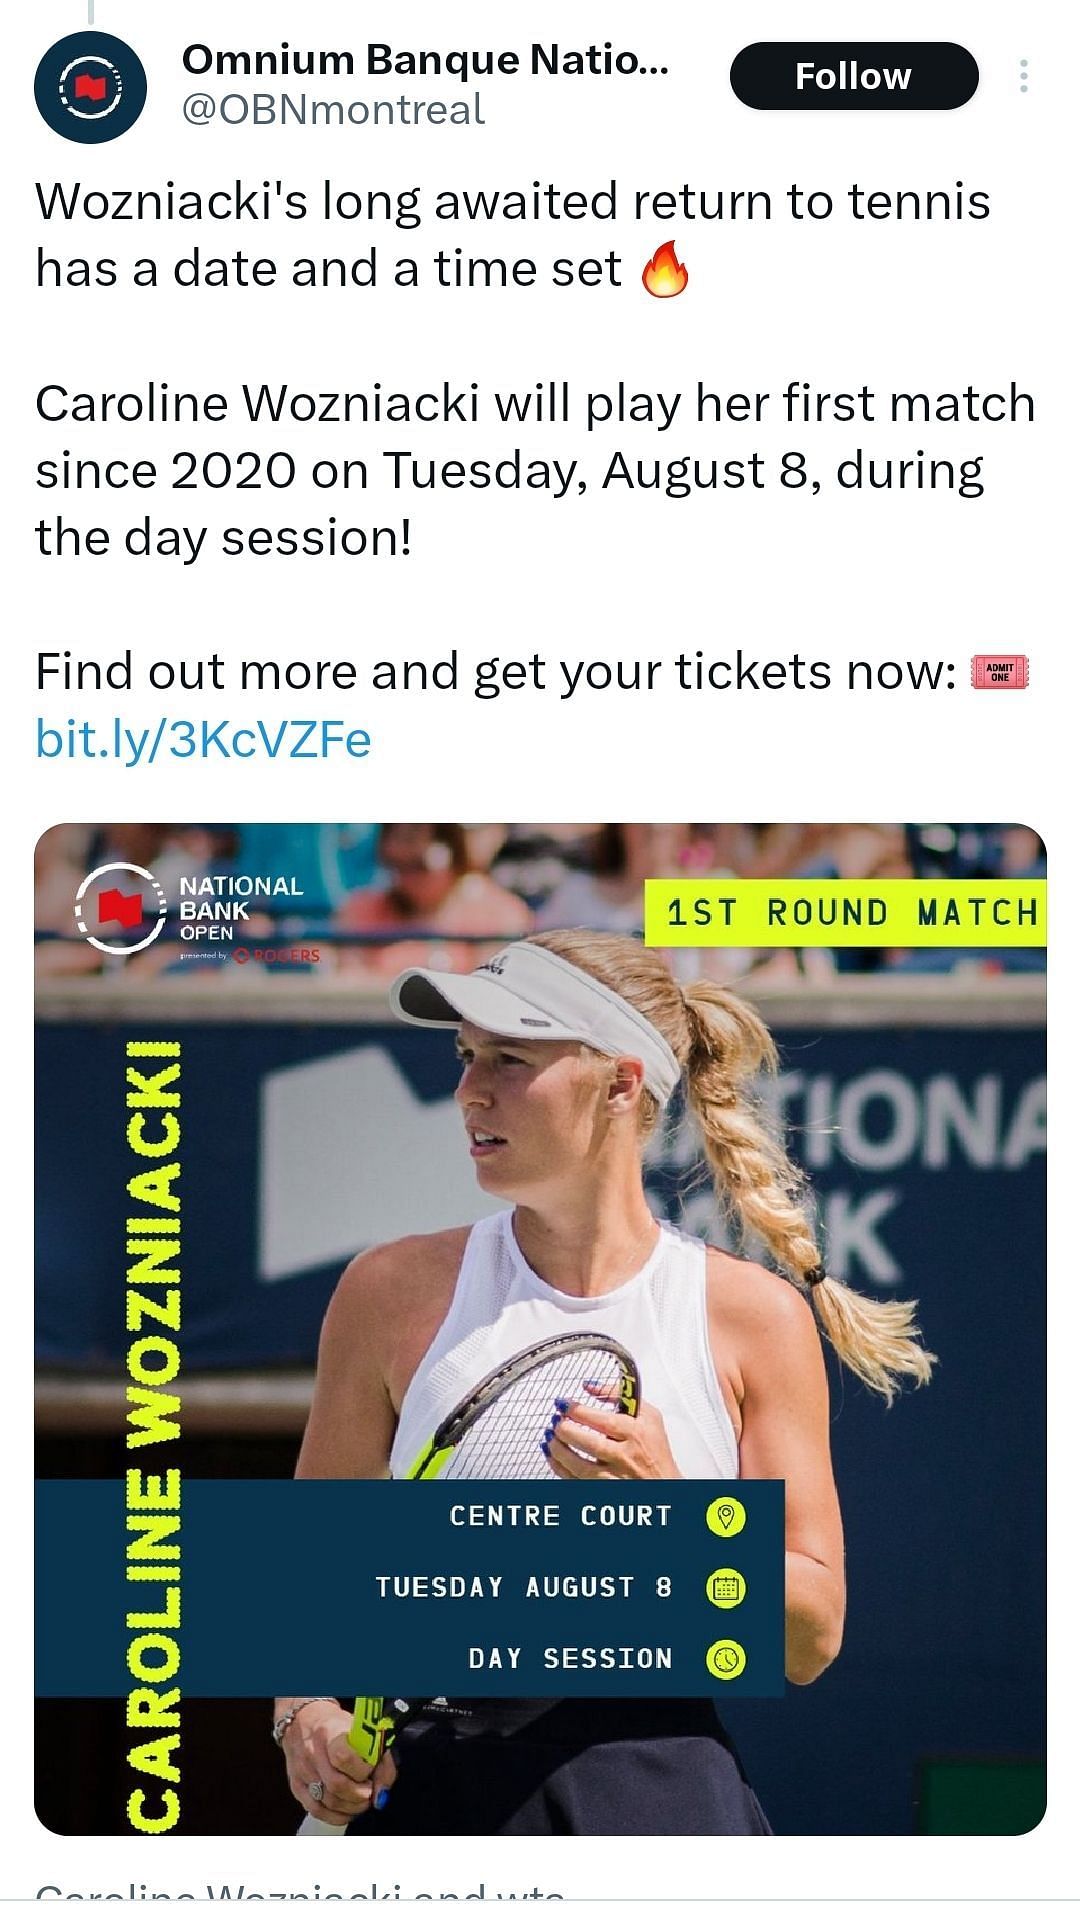 Caroline Wozniacki will feature on Day 2 of the Canadian Open